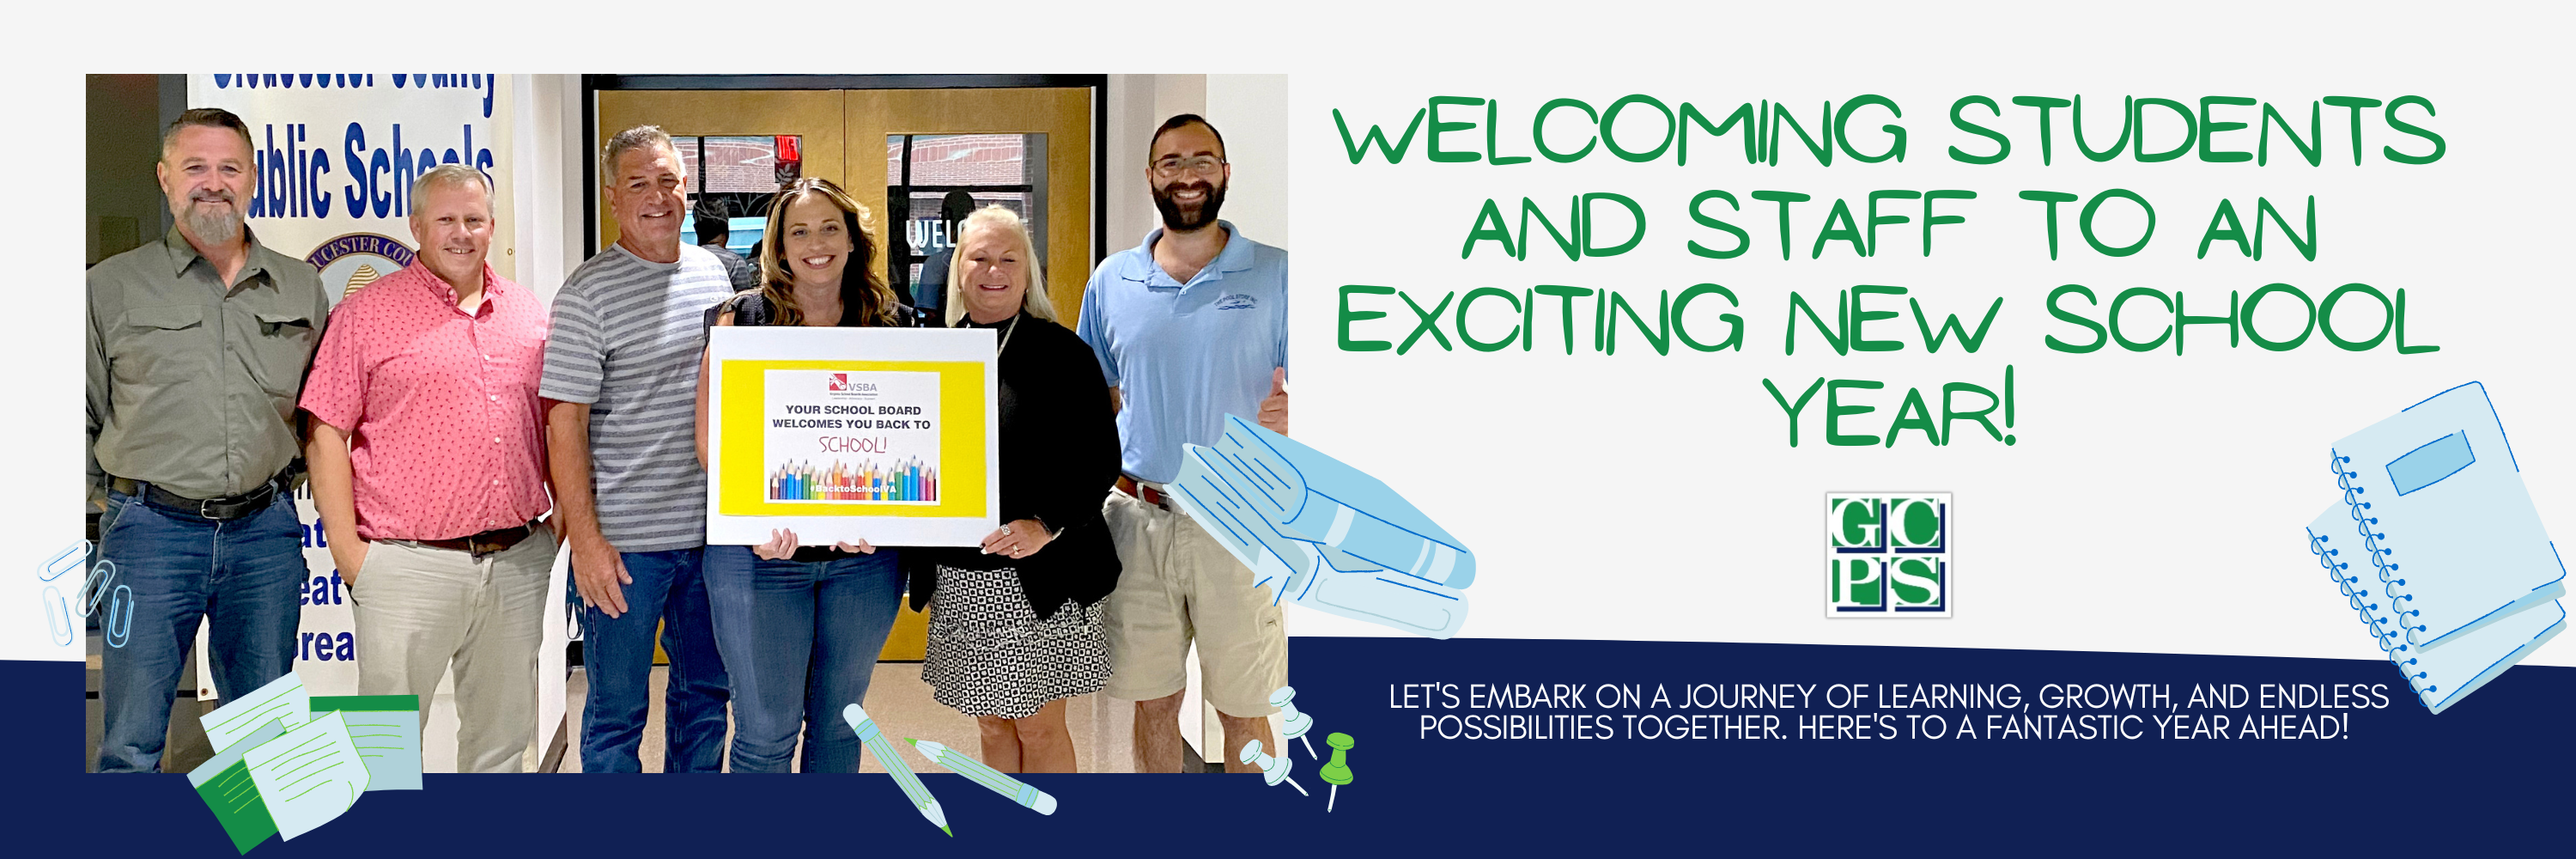 Welcoming Students and Staff to an exciting new school year! Let's embark on a journey of learning, growth, and endless possibilities together. here's to a fantastic year ahead!